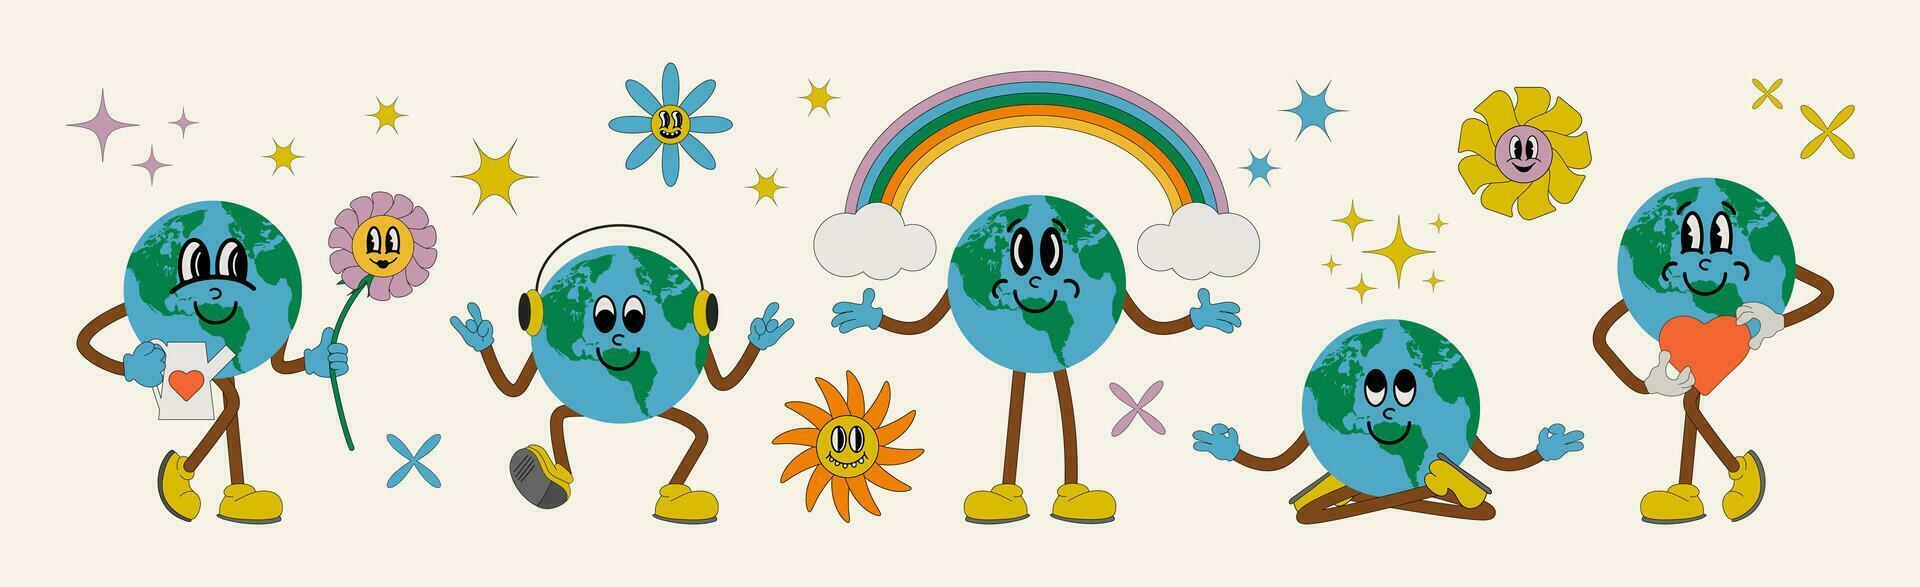 Save the planet characters in trendy retro cartoon style. Set of mascots for Earth Day. World Earth Day. Funny vector illustration of planet earth, earth meditation, heart, watering flowers, rainbow.